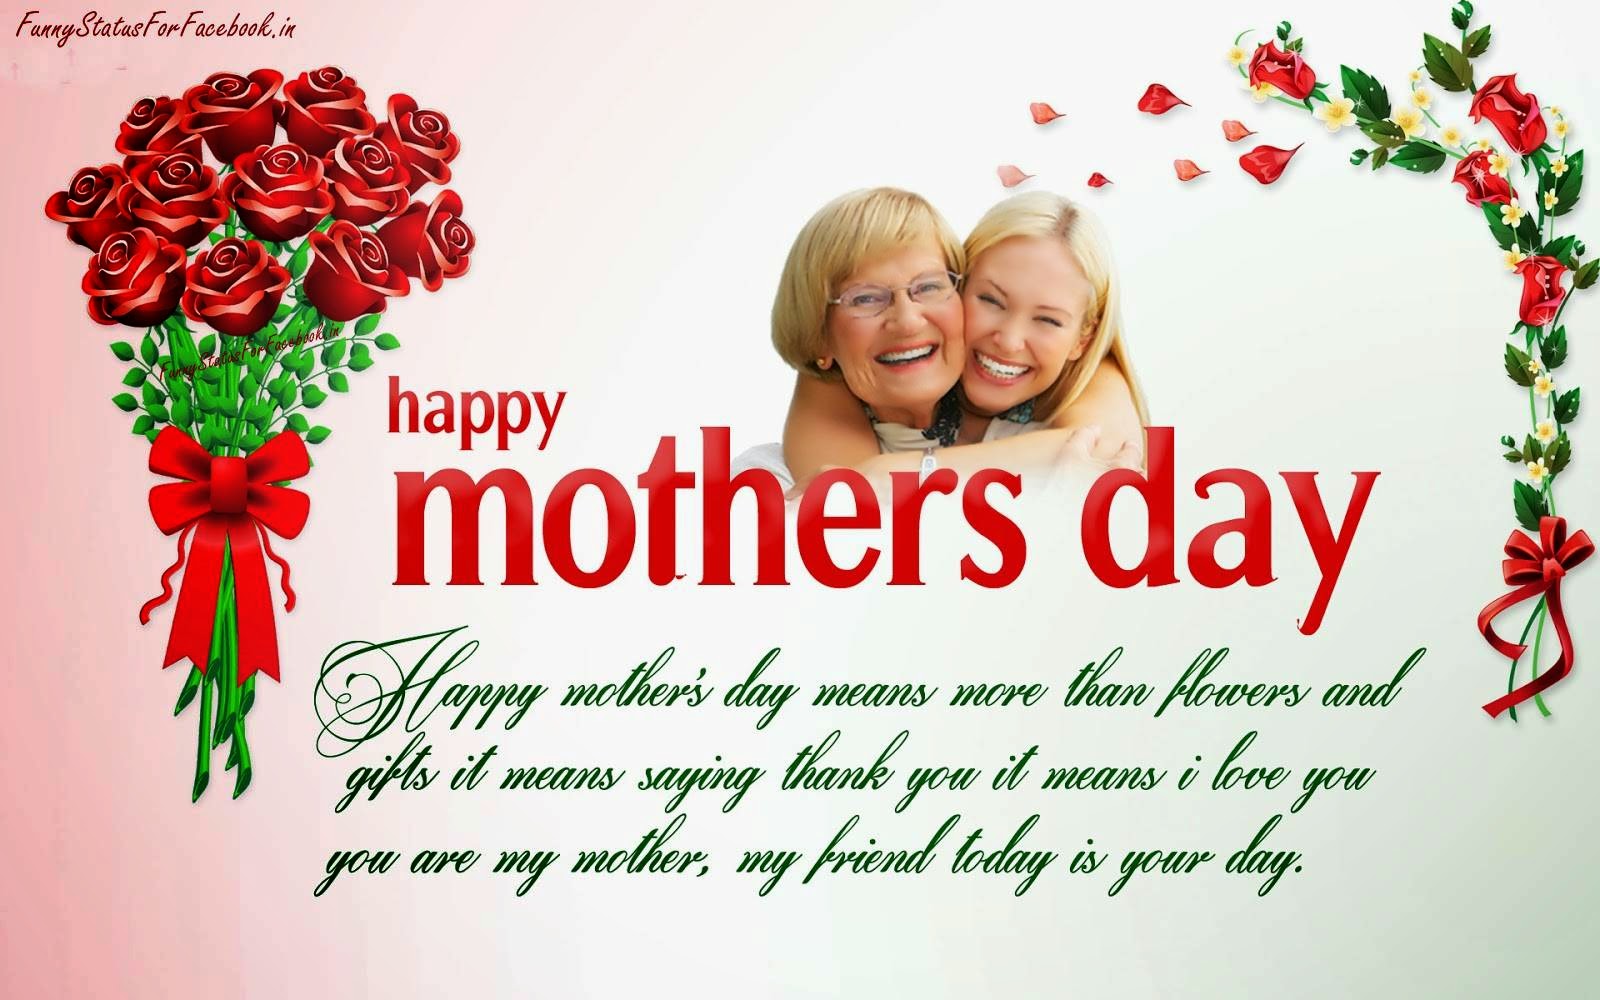 Happy Mother s Day means more than flowers and ts It means saying thank you It means